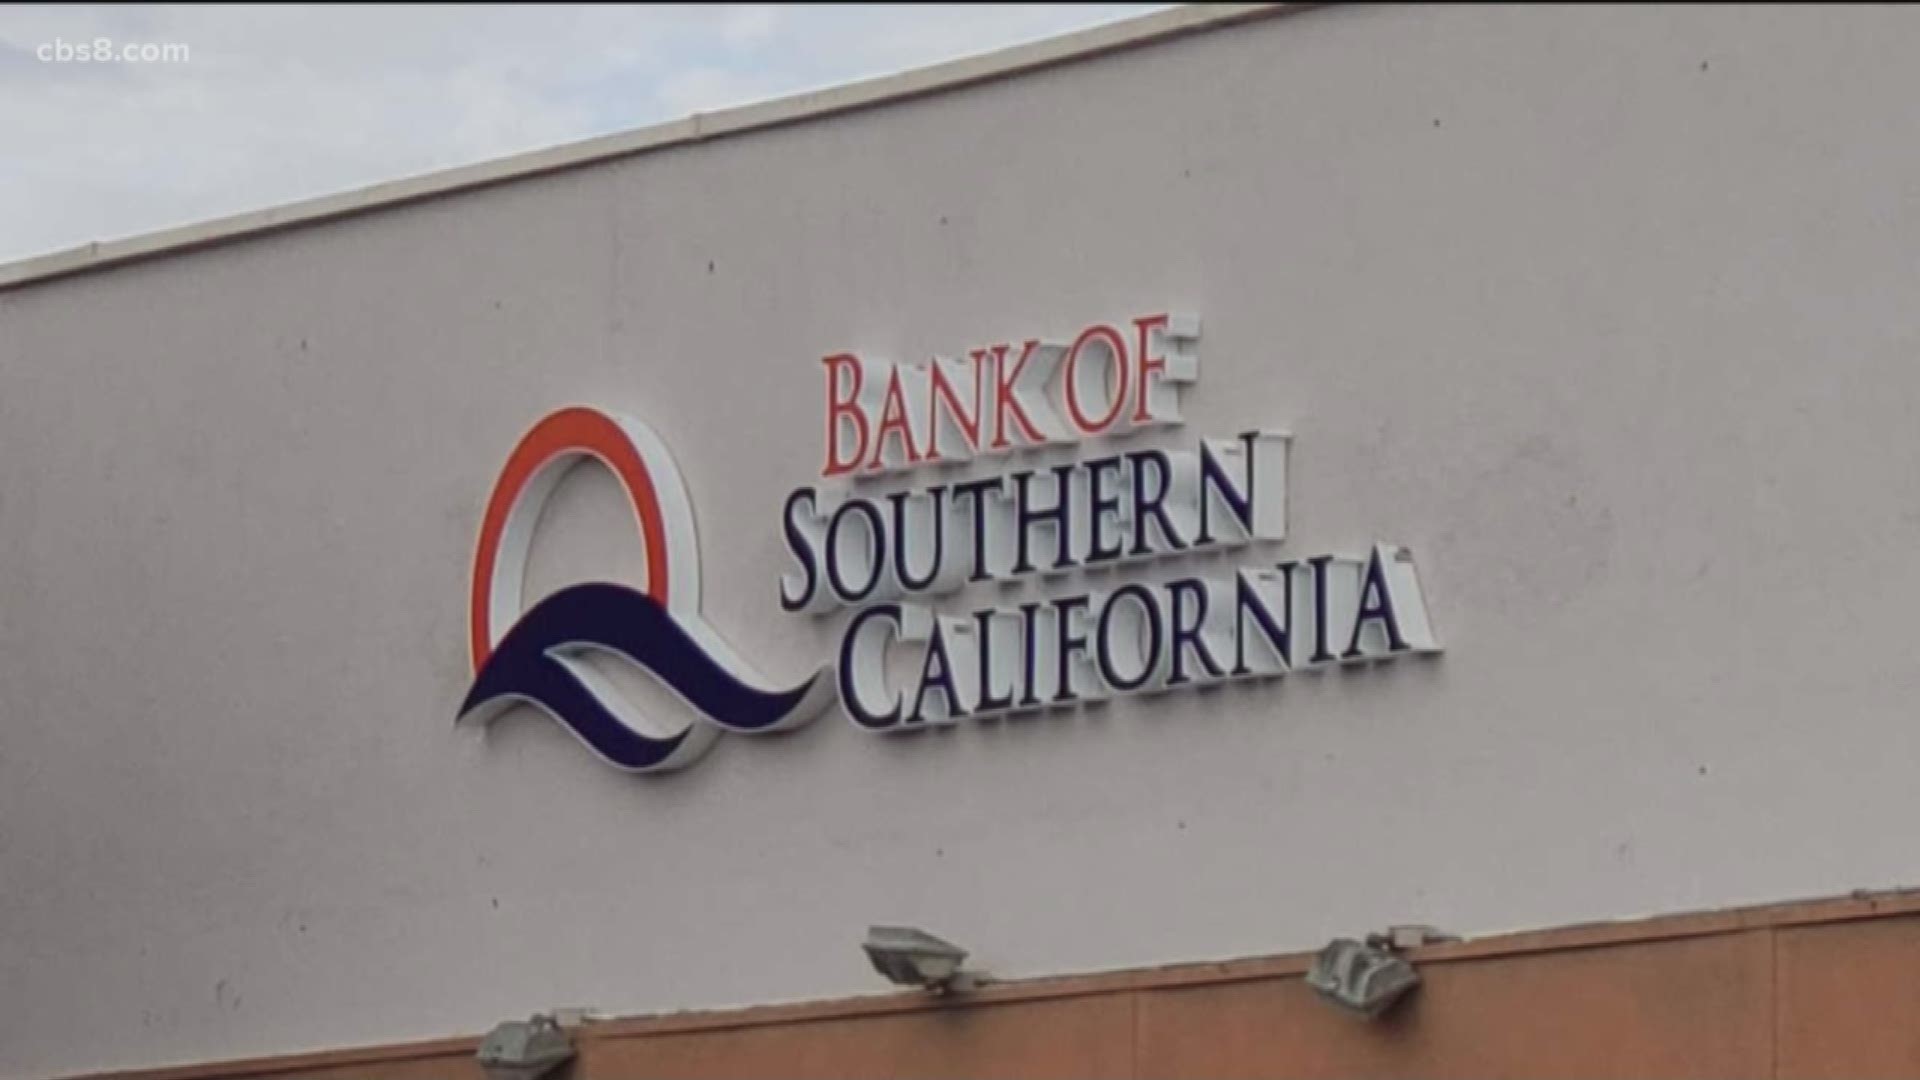 News 8 found one SoCal bank willing to process loans for all customers.